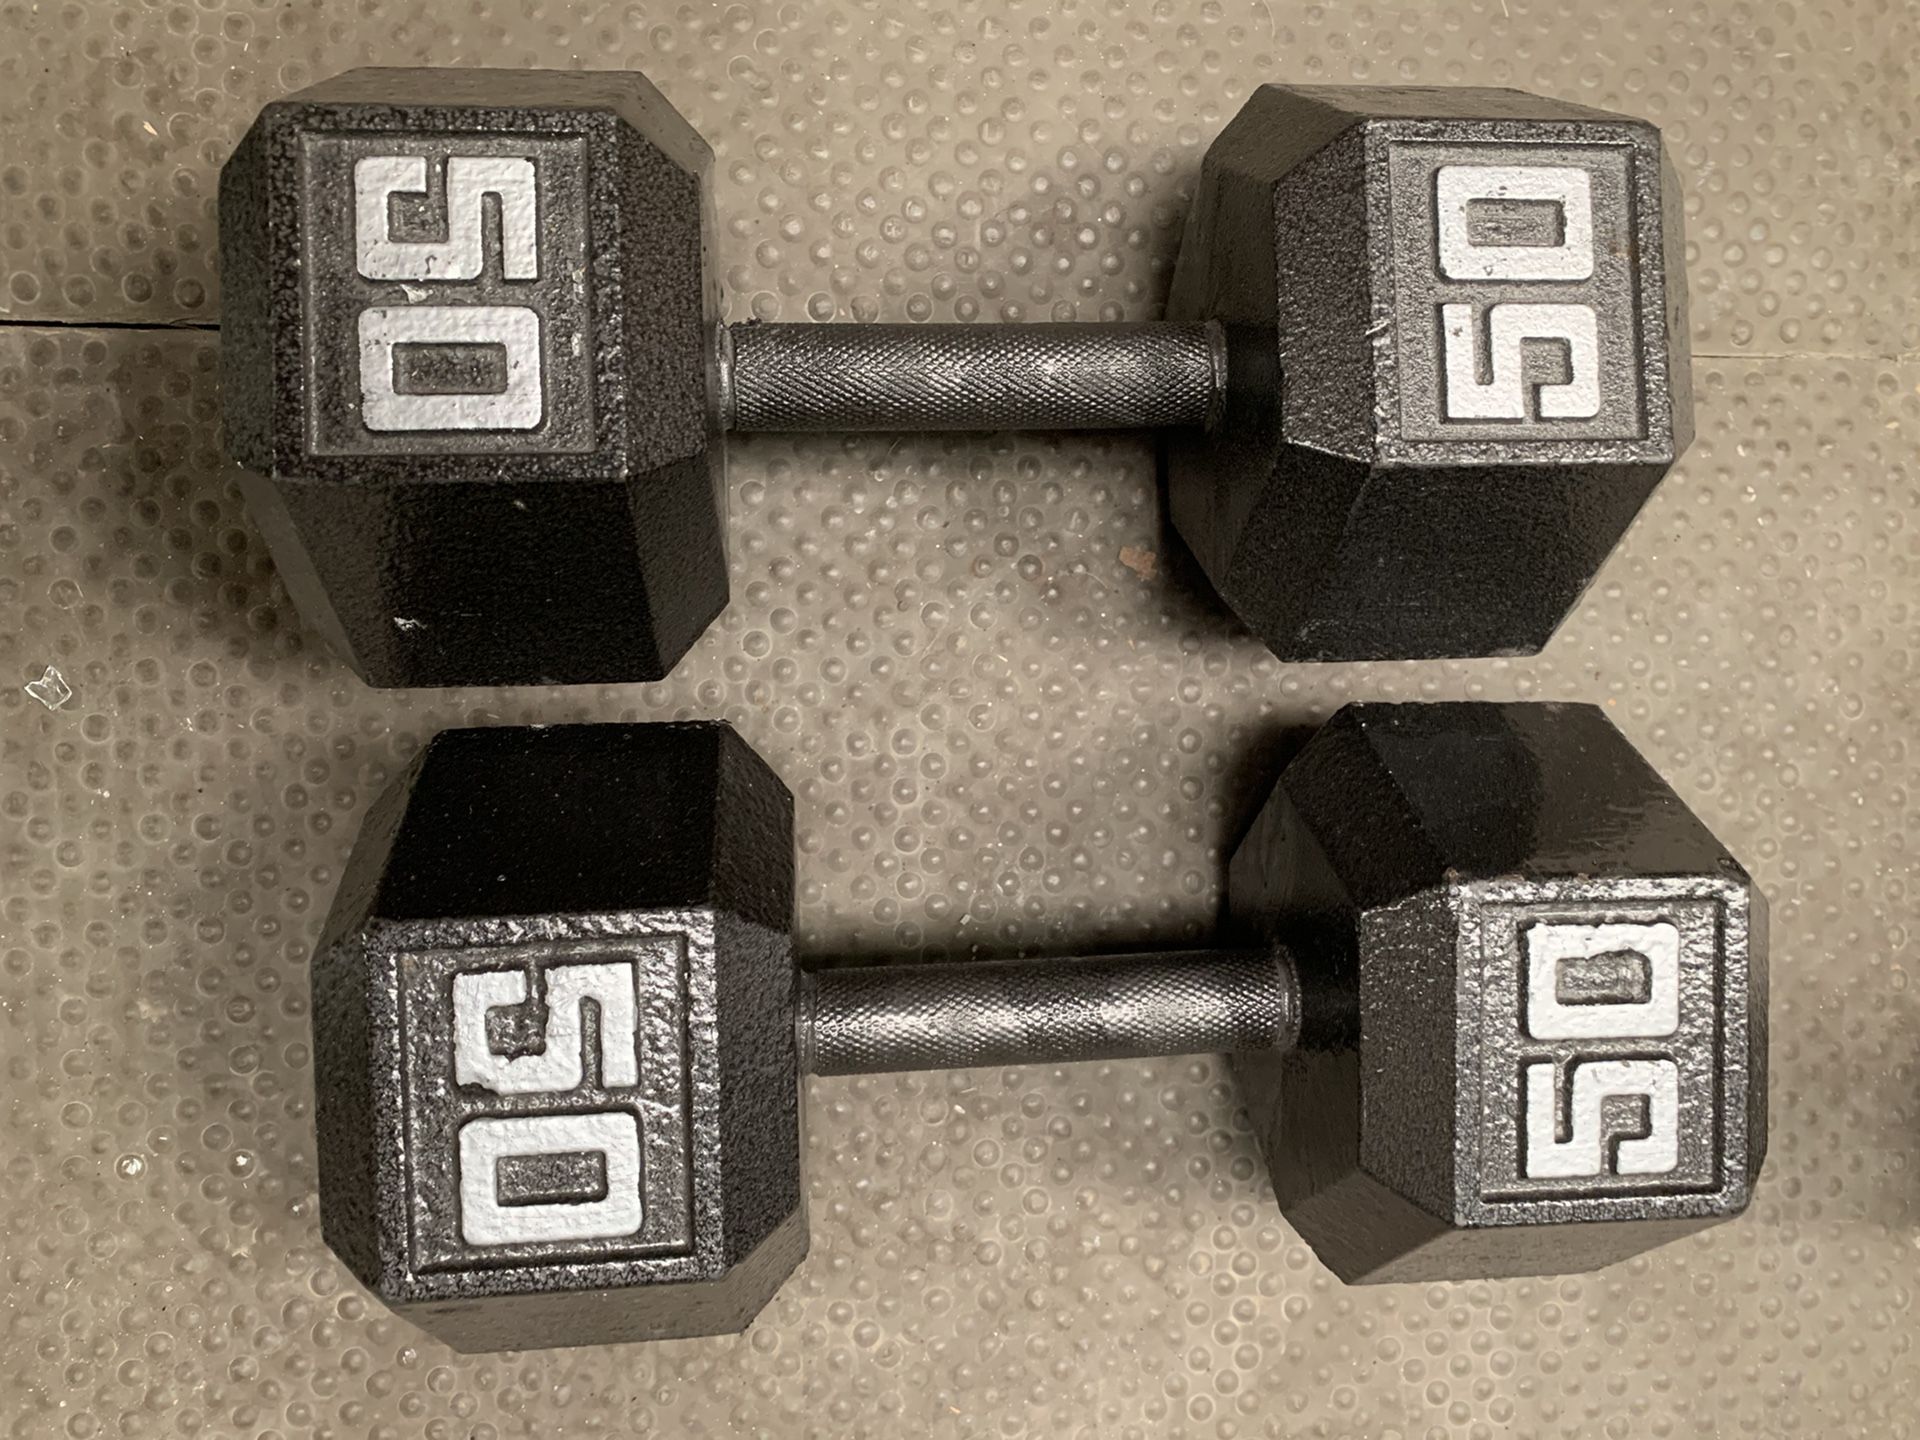 Dumbbells $1.50 per pound or all for $540!